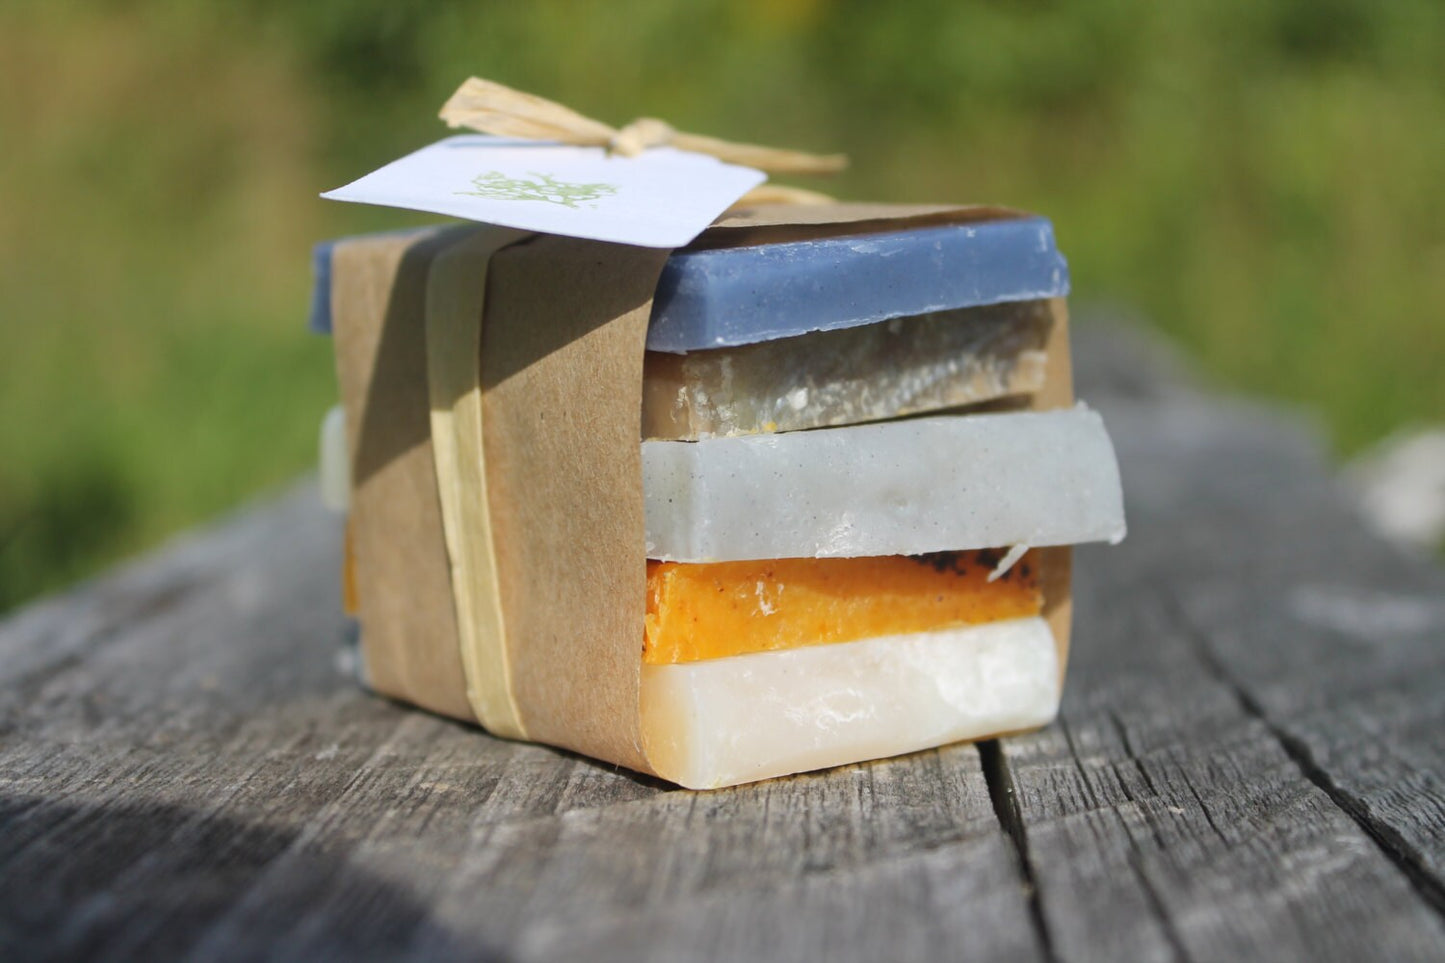 Vermont Made Artisan Soap Sampler All Natural Handcrafted Soap-Belle Savon Vermont